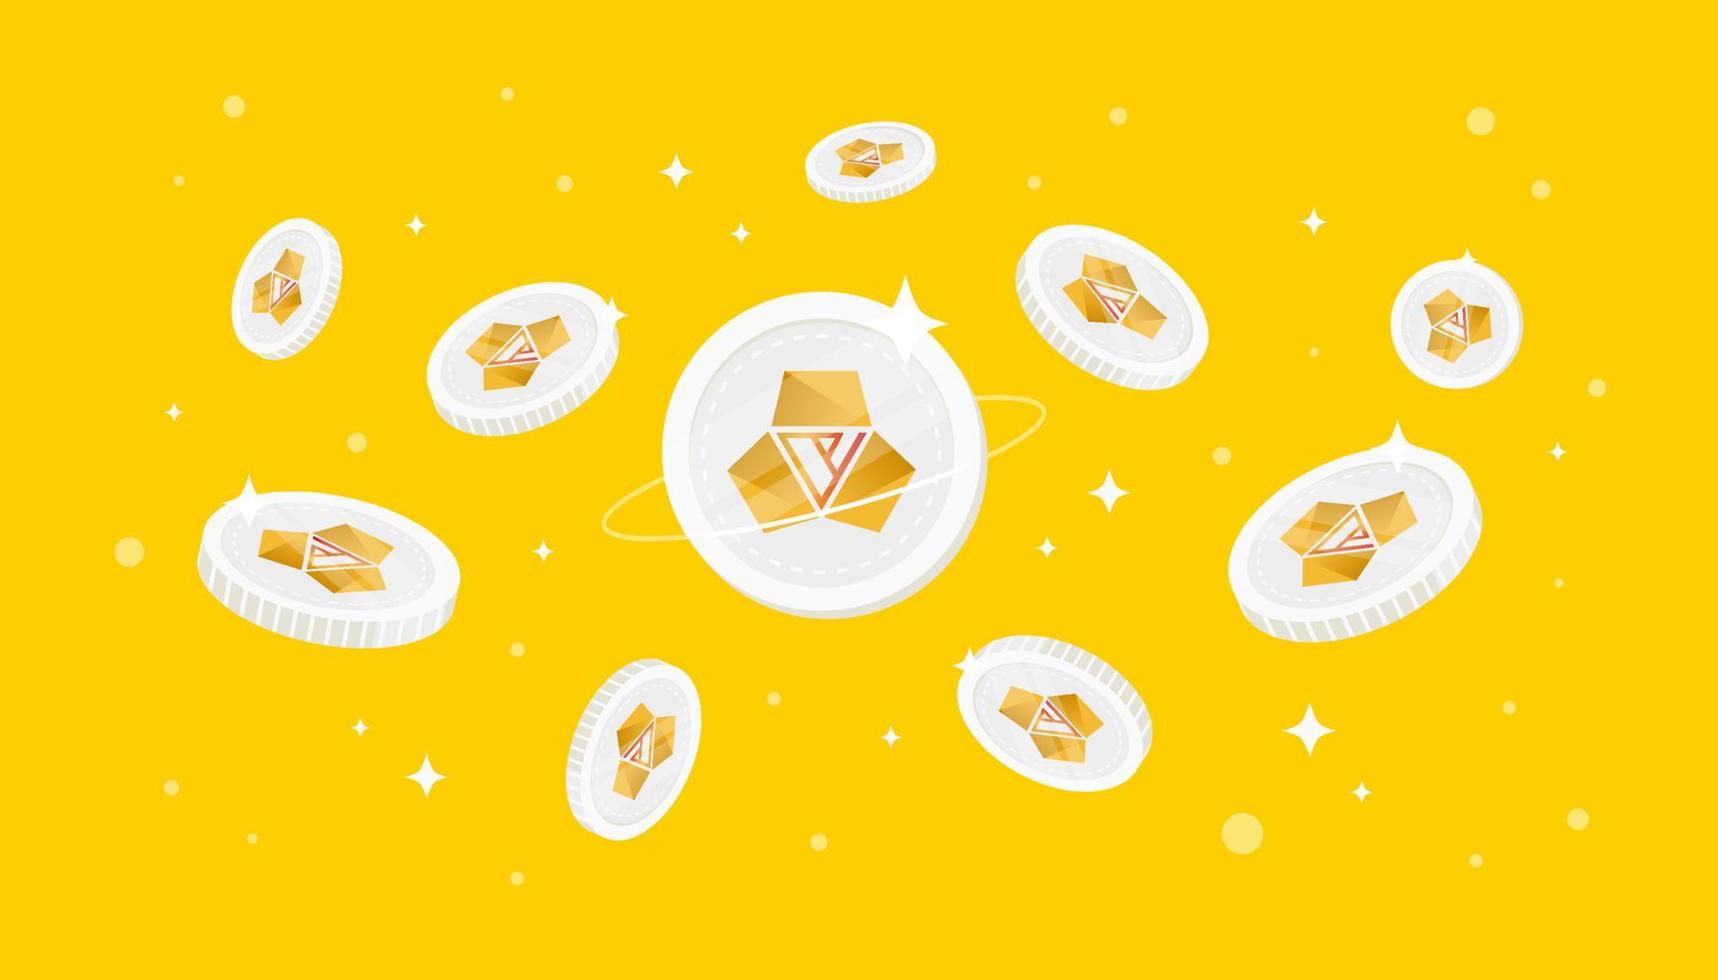 DEAPcoin coins falling from the sky. DEP cryptocurrency concept banner background. vector